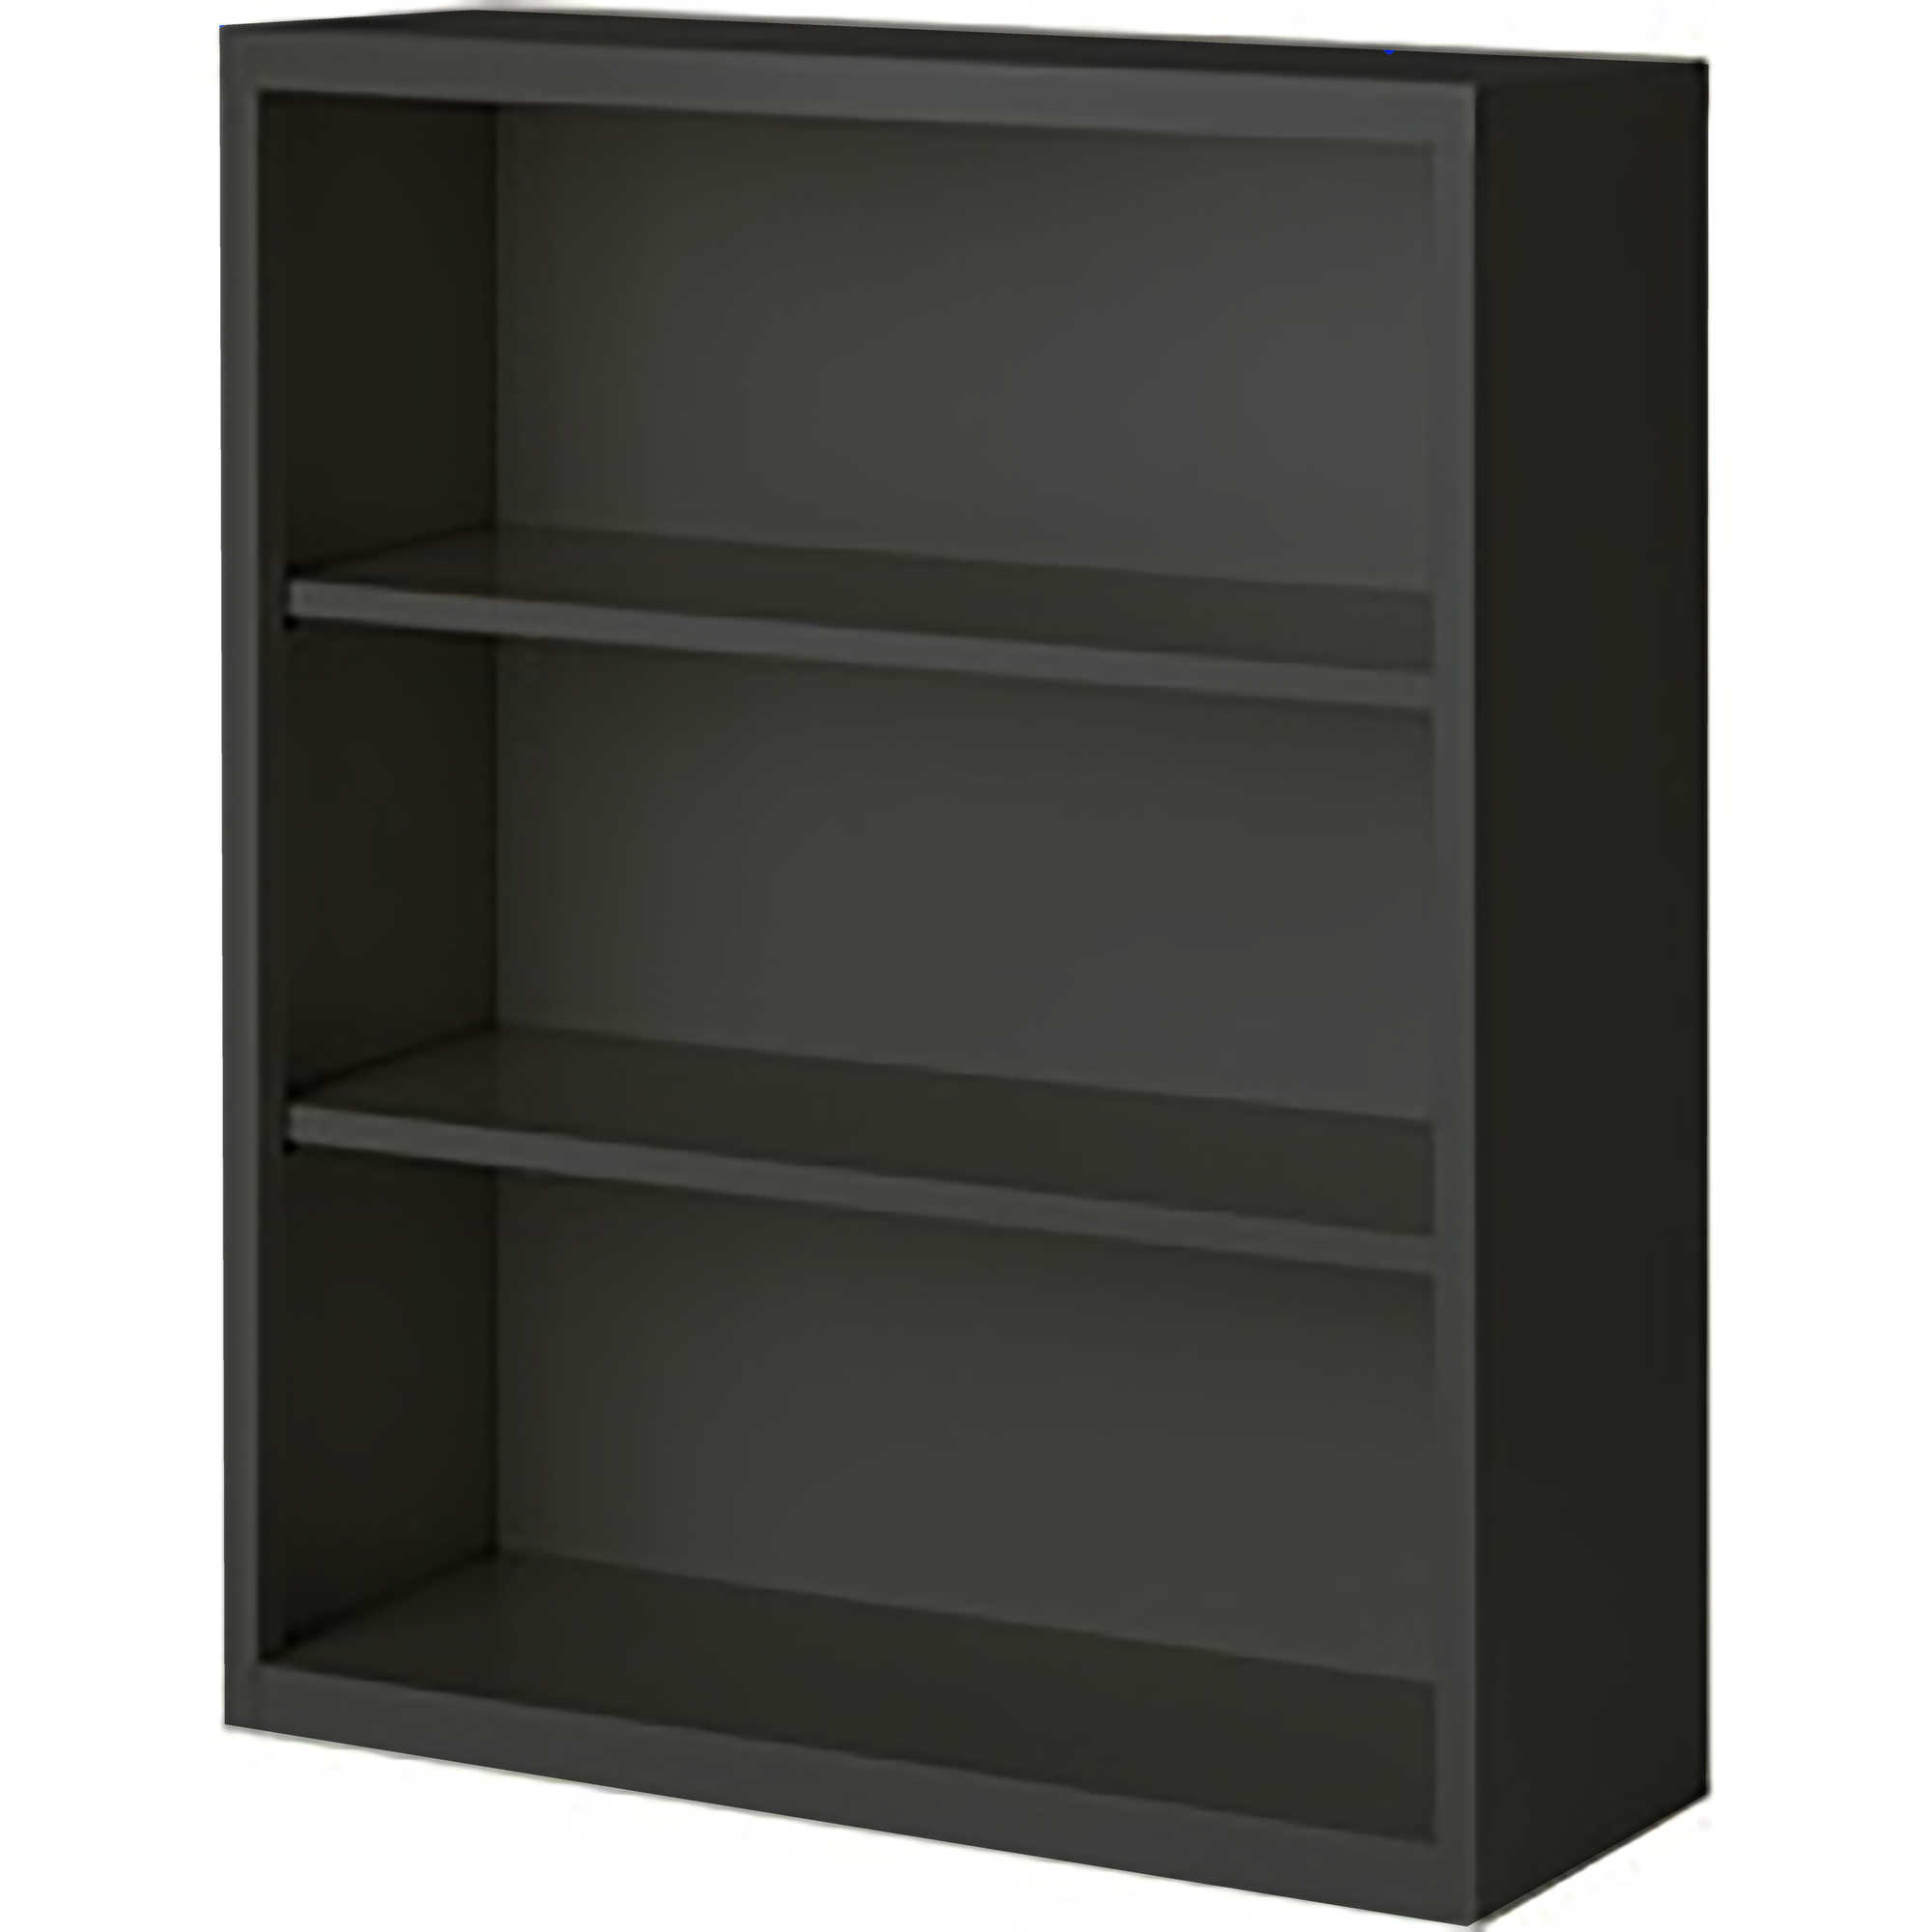 Steel Cabinets USA, 36Inchx18Inchx42Inch Charcoal Bookcase Steel Full Assembled, Height 42 in, Shelves (qty.) 3, Material Steel, Model BCA-364218-C